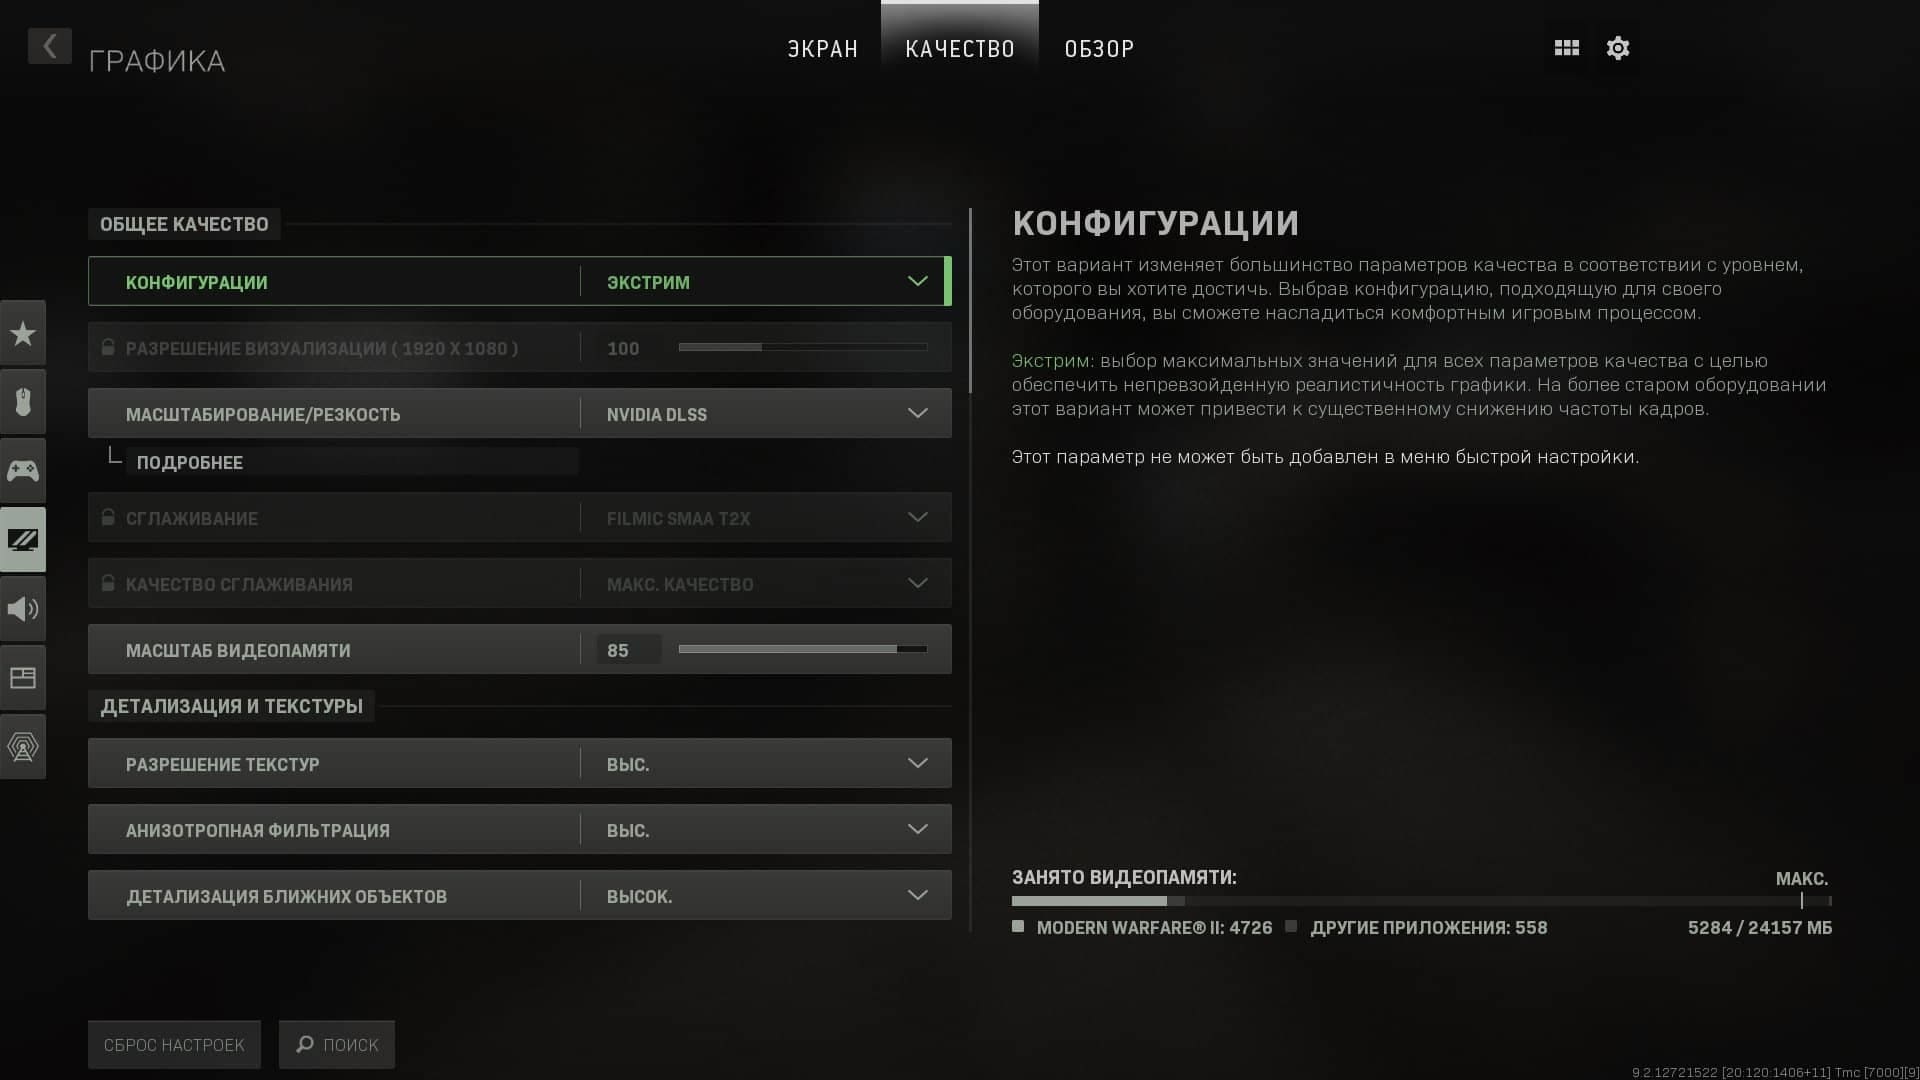 Please make sure plusmaster client is updated and running что делать call of duty фото 53